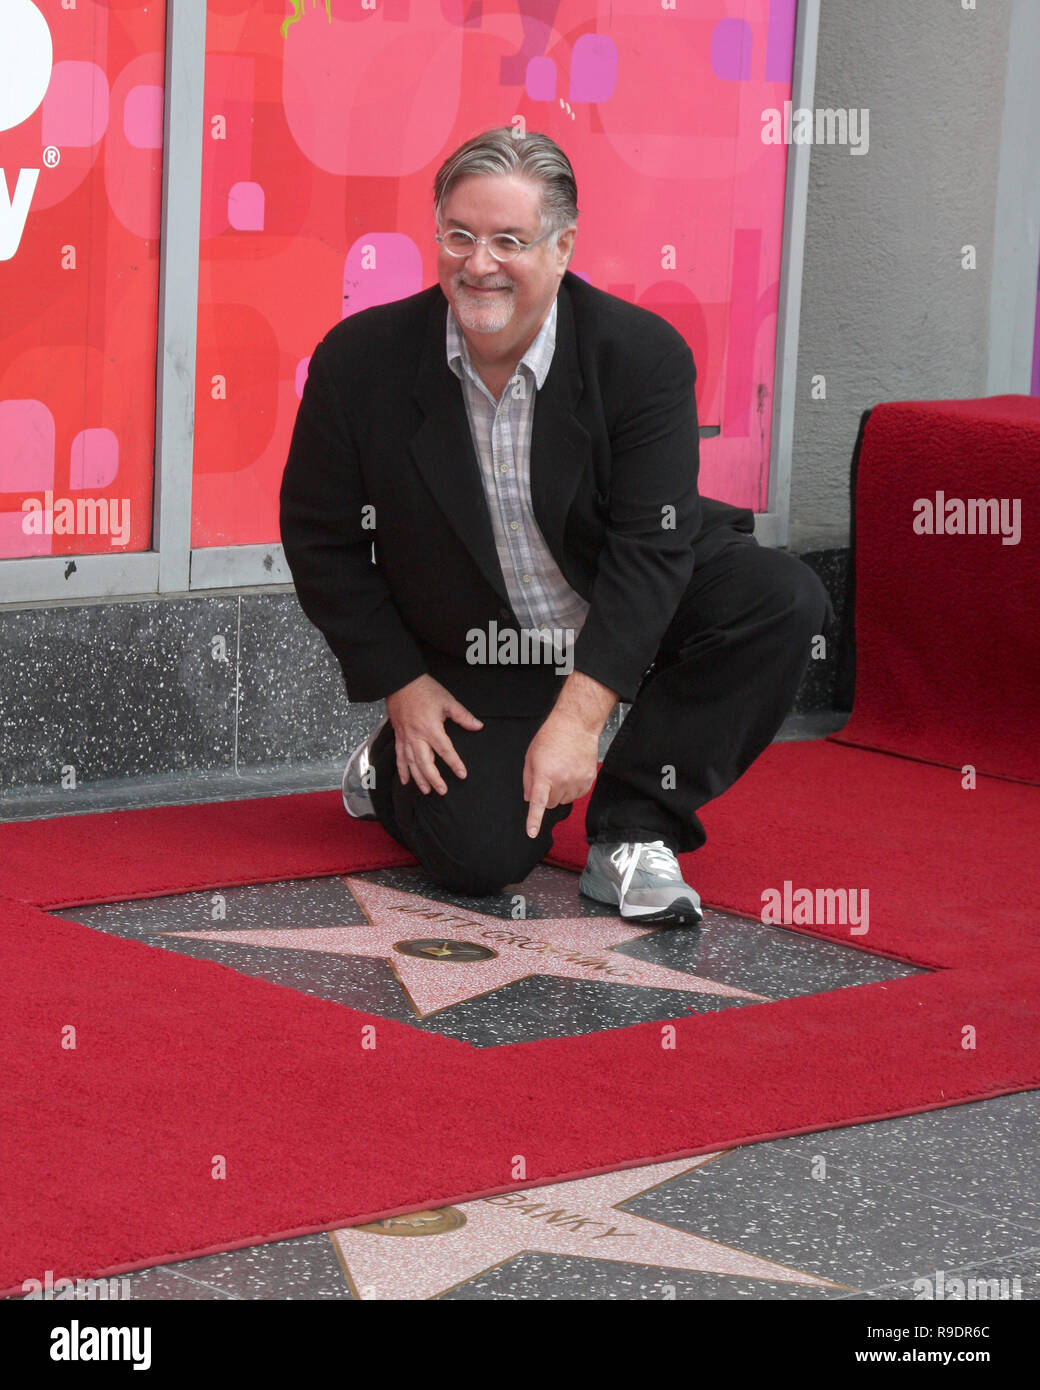 Los Angeles, CA, USA. 14th Feb, 2012. LOS ANGELES - FEB 14: Matt Groening at the Matt Groening Star Ceremony on the Hollywood Walk of Fame on February 14, 2012 in Los Angeles, CA Credit: Kay Blake/ZUMA Wire/Alamy Live News Stock Photo